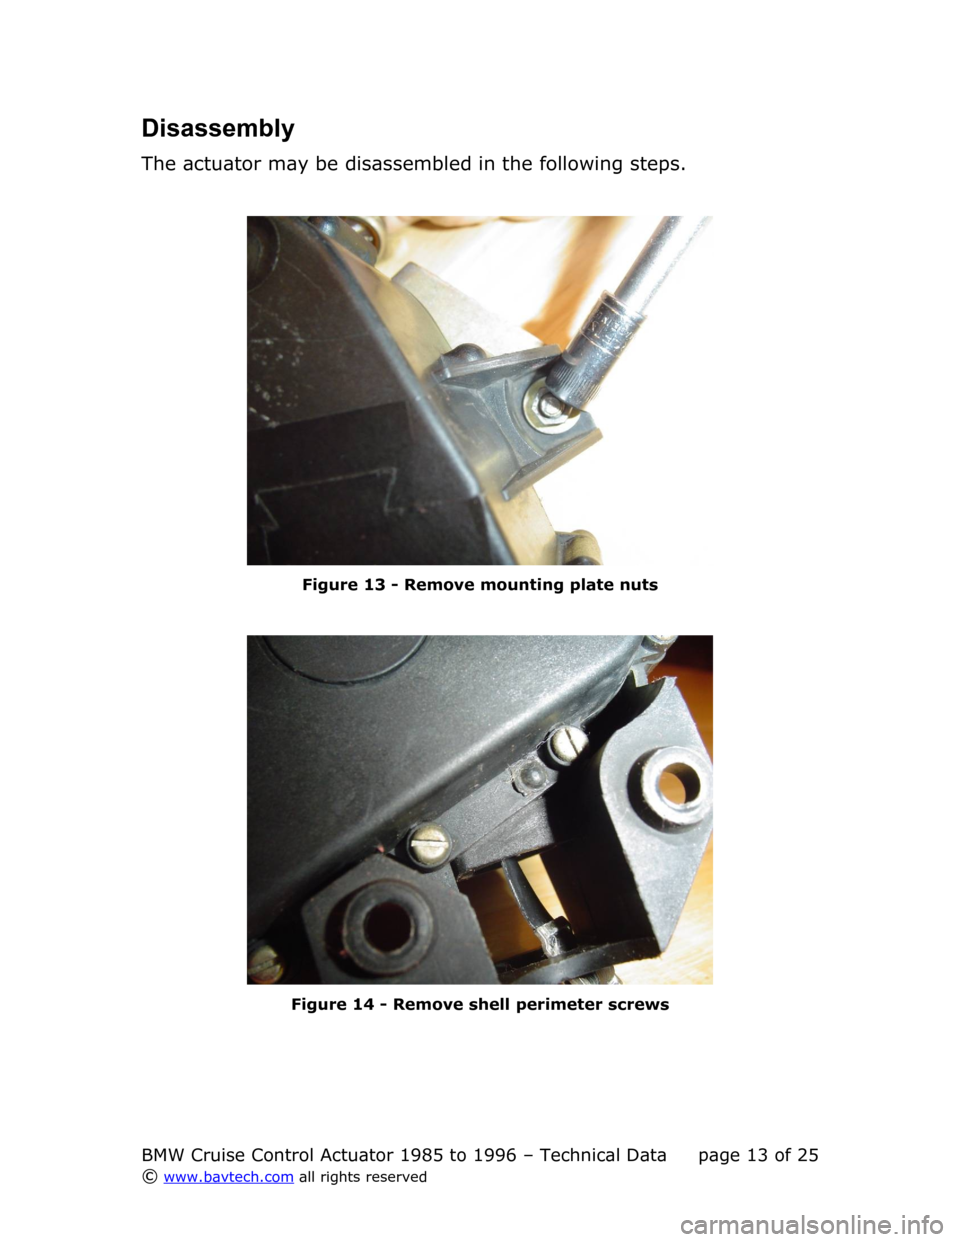 BMW 7 SERIES 1988 E32 Cruise Control Acutator Disassembly
The actuator may be disassembled in the following steps.
Figure  13  - Remove mounting plate nuts
Figure  14  - Remove shell perimeter screws
BMW Cruise Control Actuator 1985 to 1996 – T